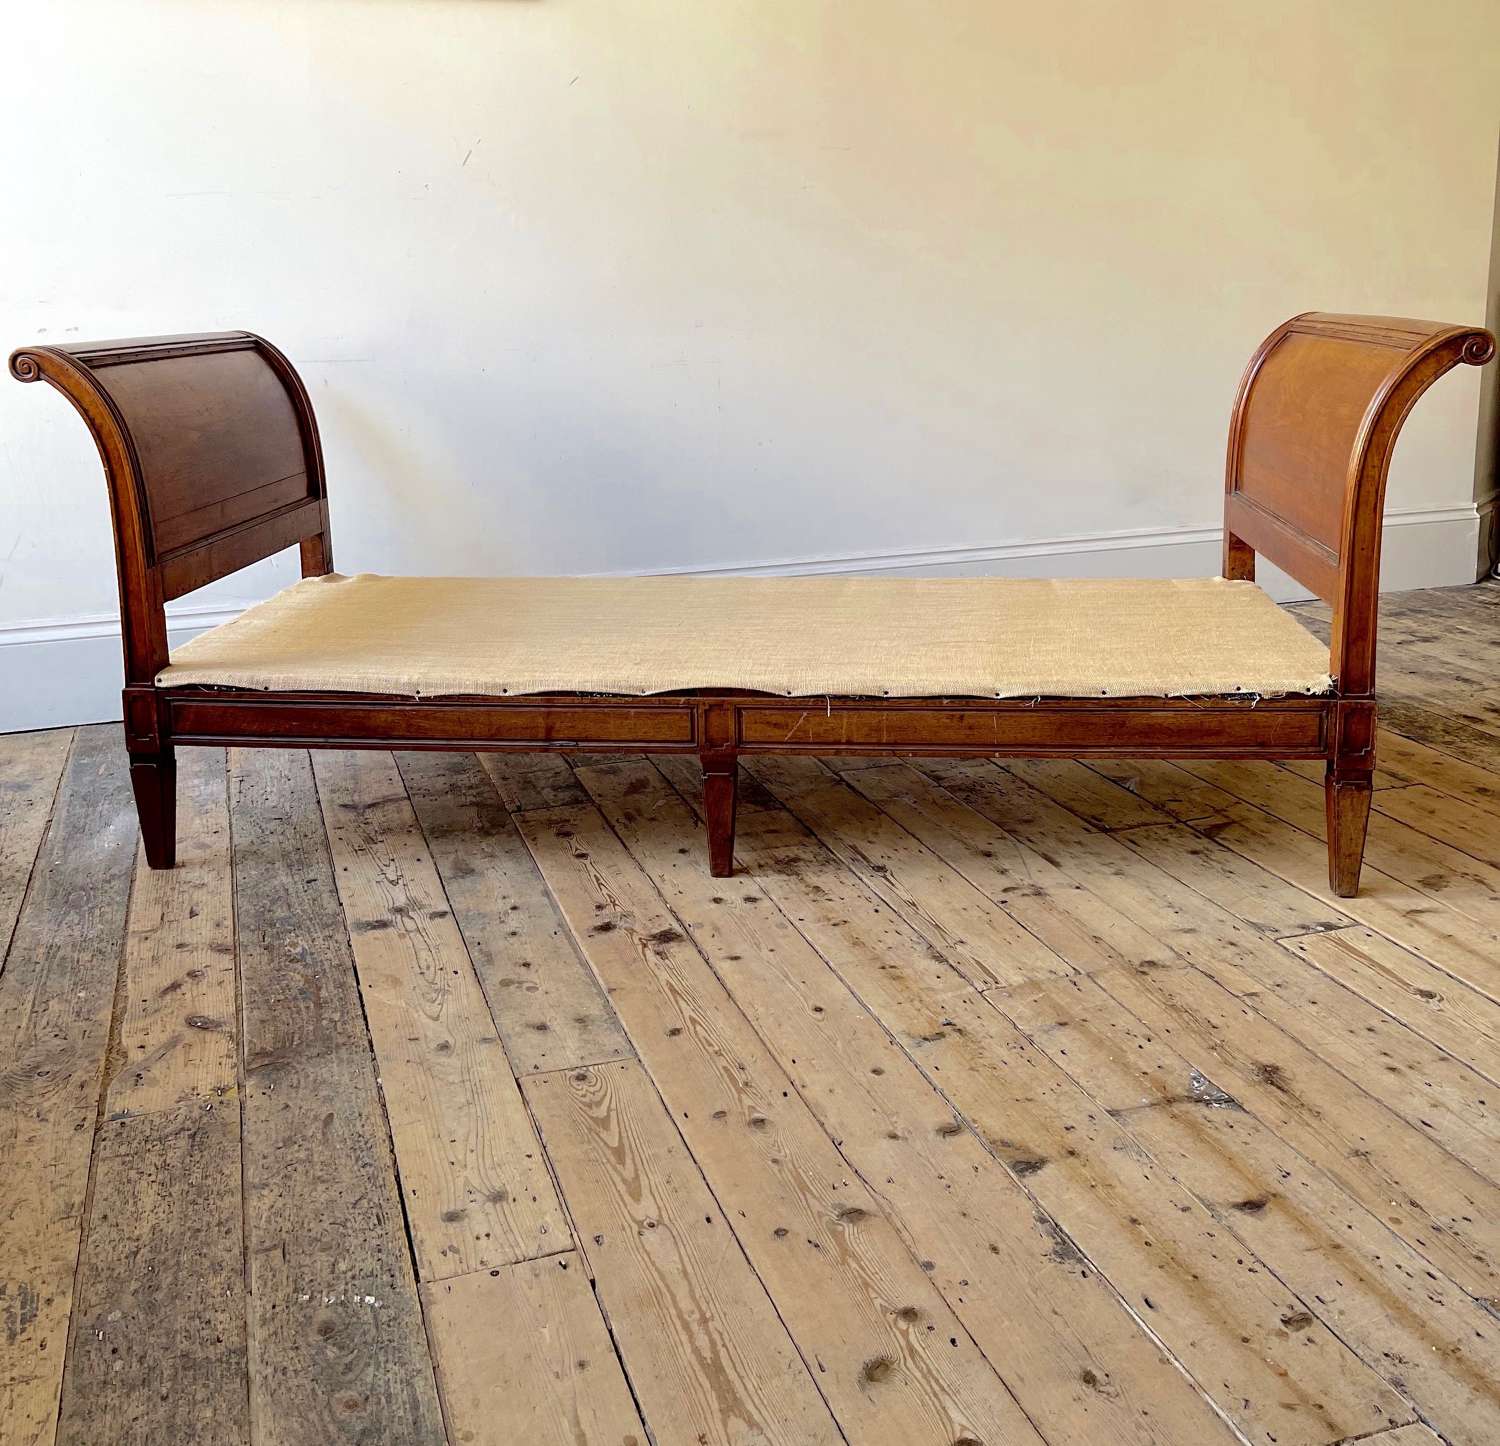 19th century upholstered bench / window seat.